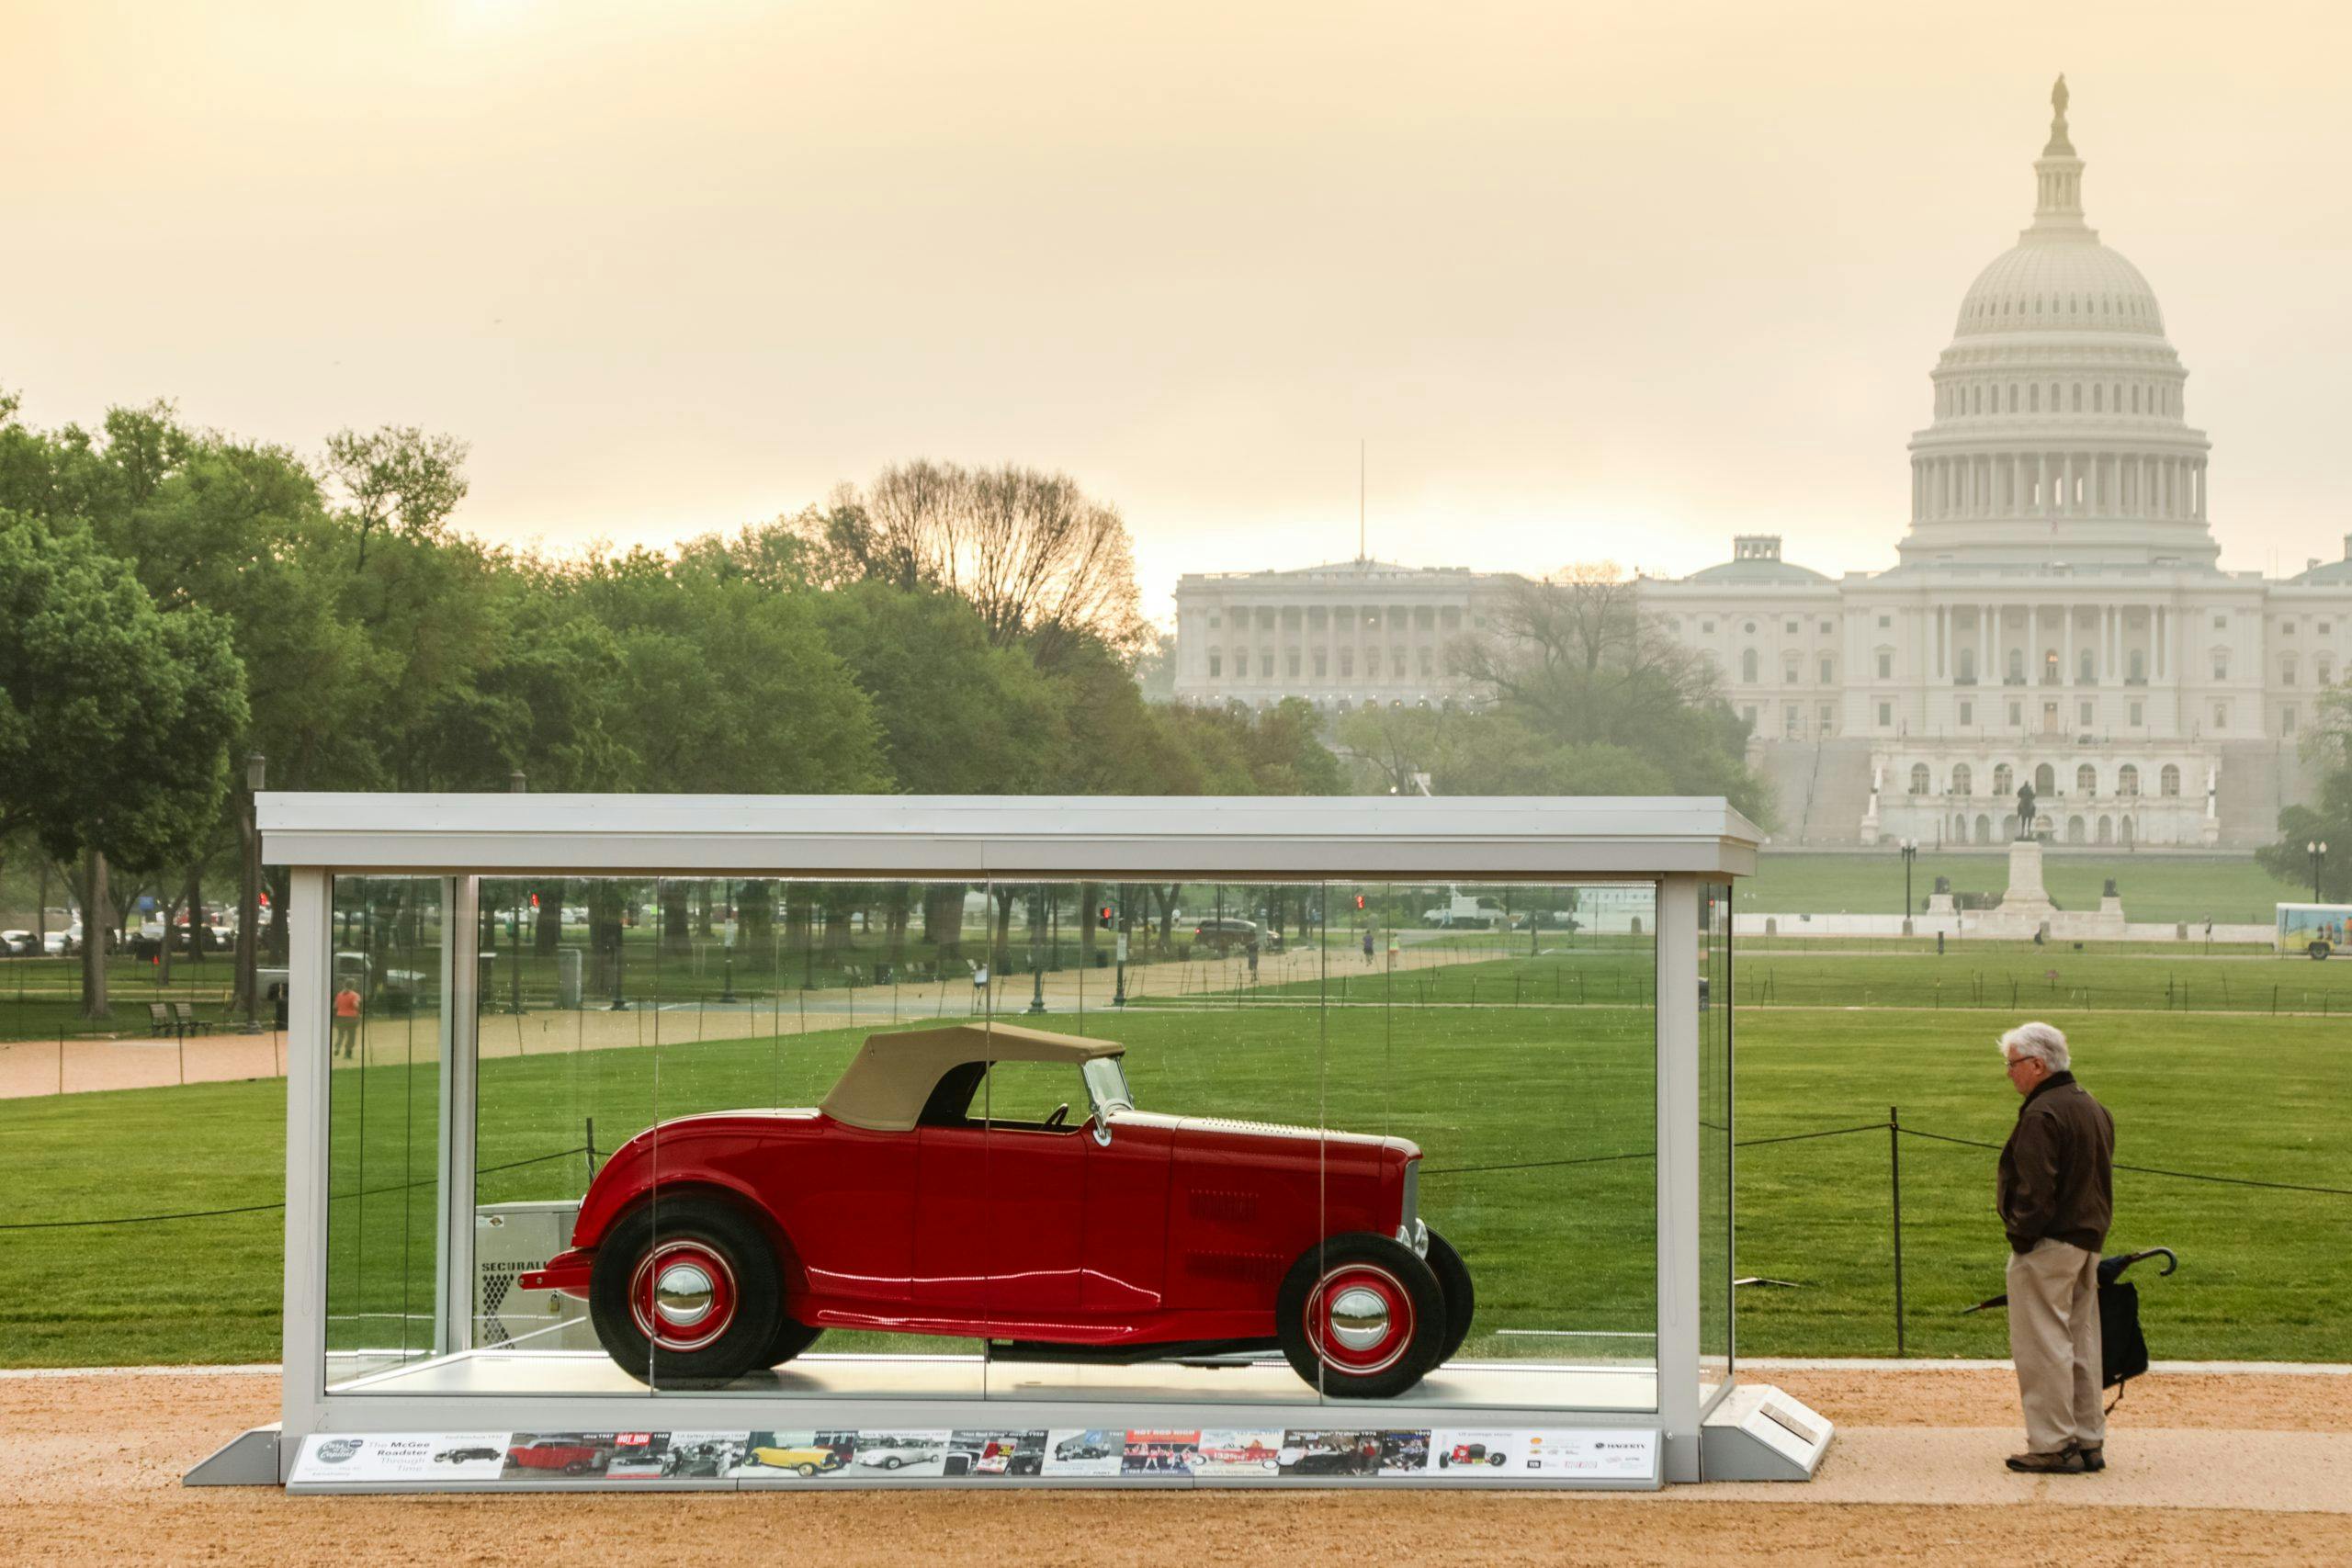 McGee Roadster - 1932 Ford - HVA Cars at the Capital 4